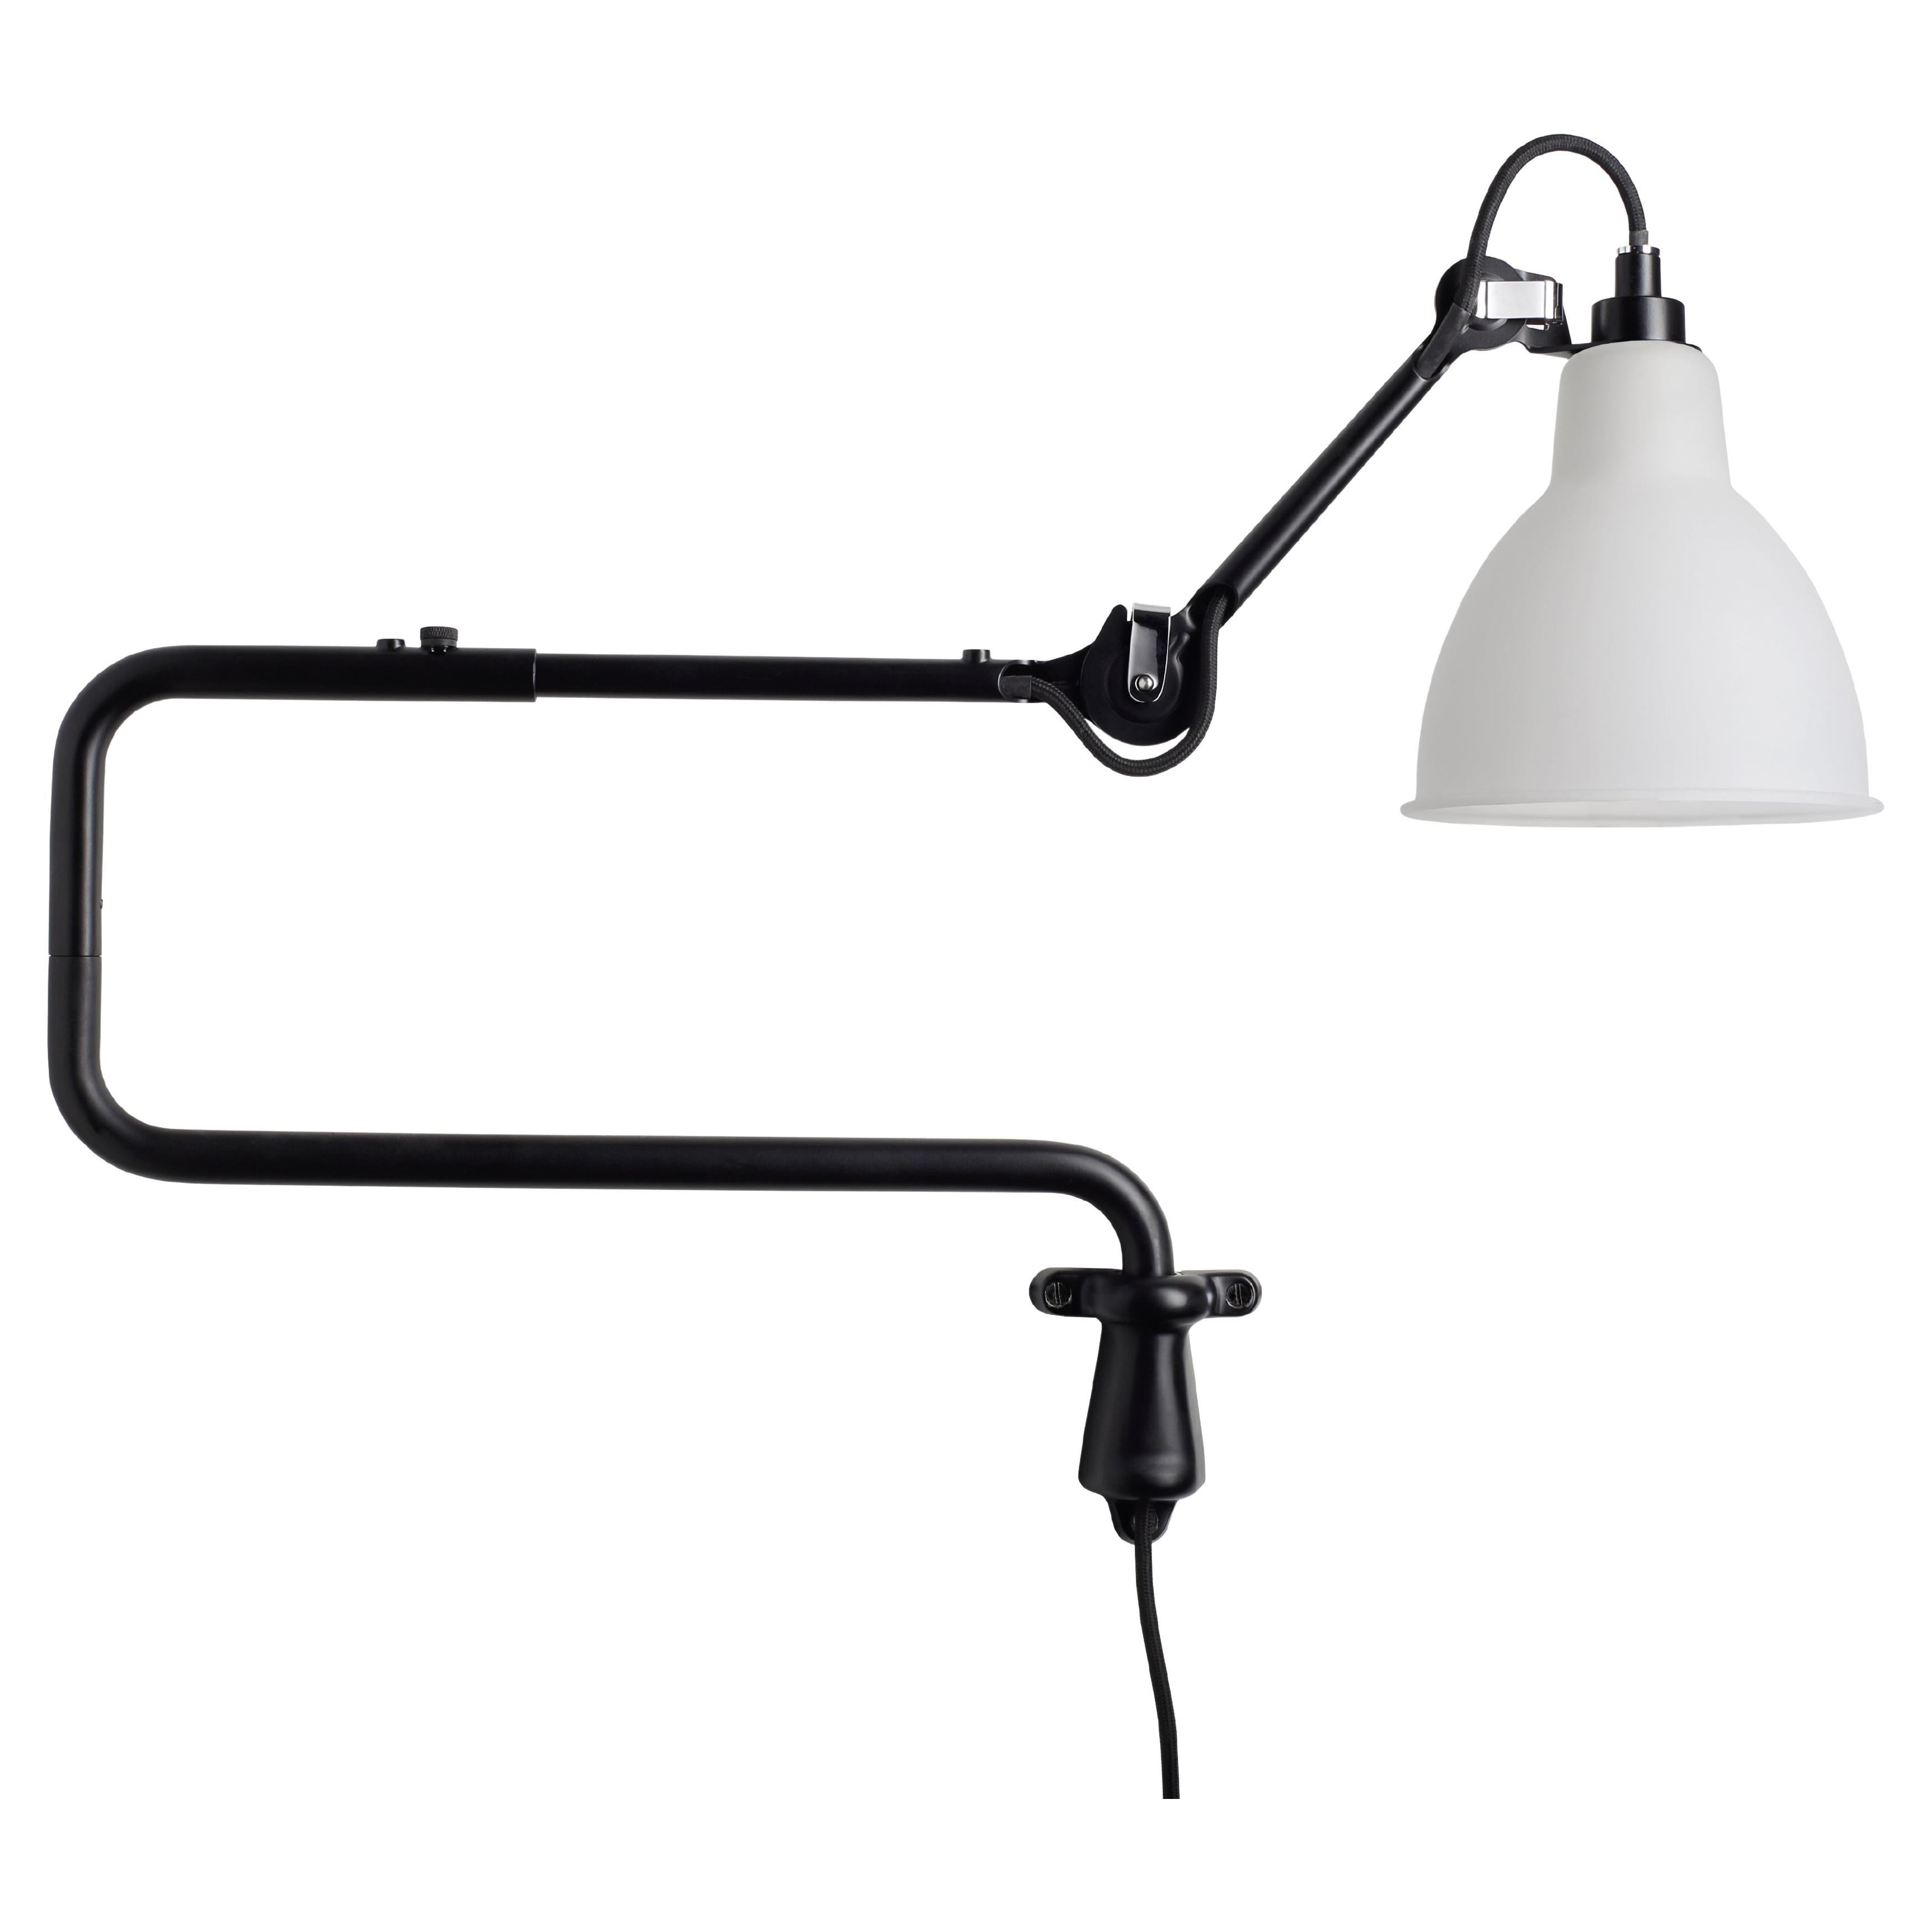 DCW Editions La Lampe Gras N°303 Wall Lamp in Black Arm and Frosted Glass Shade For Sale